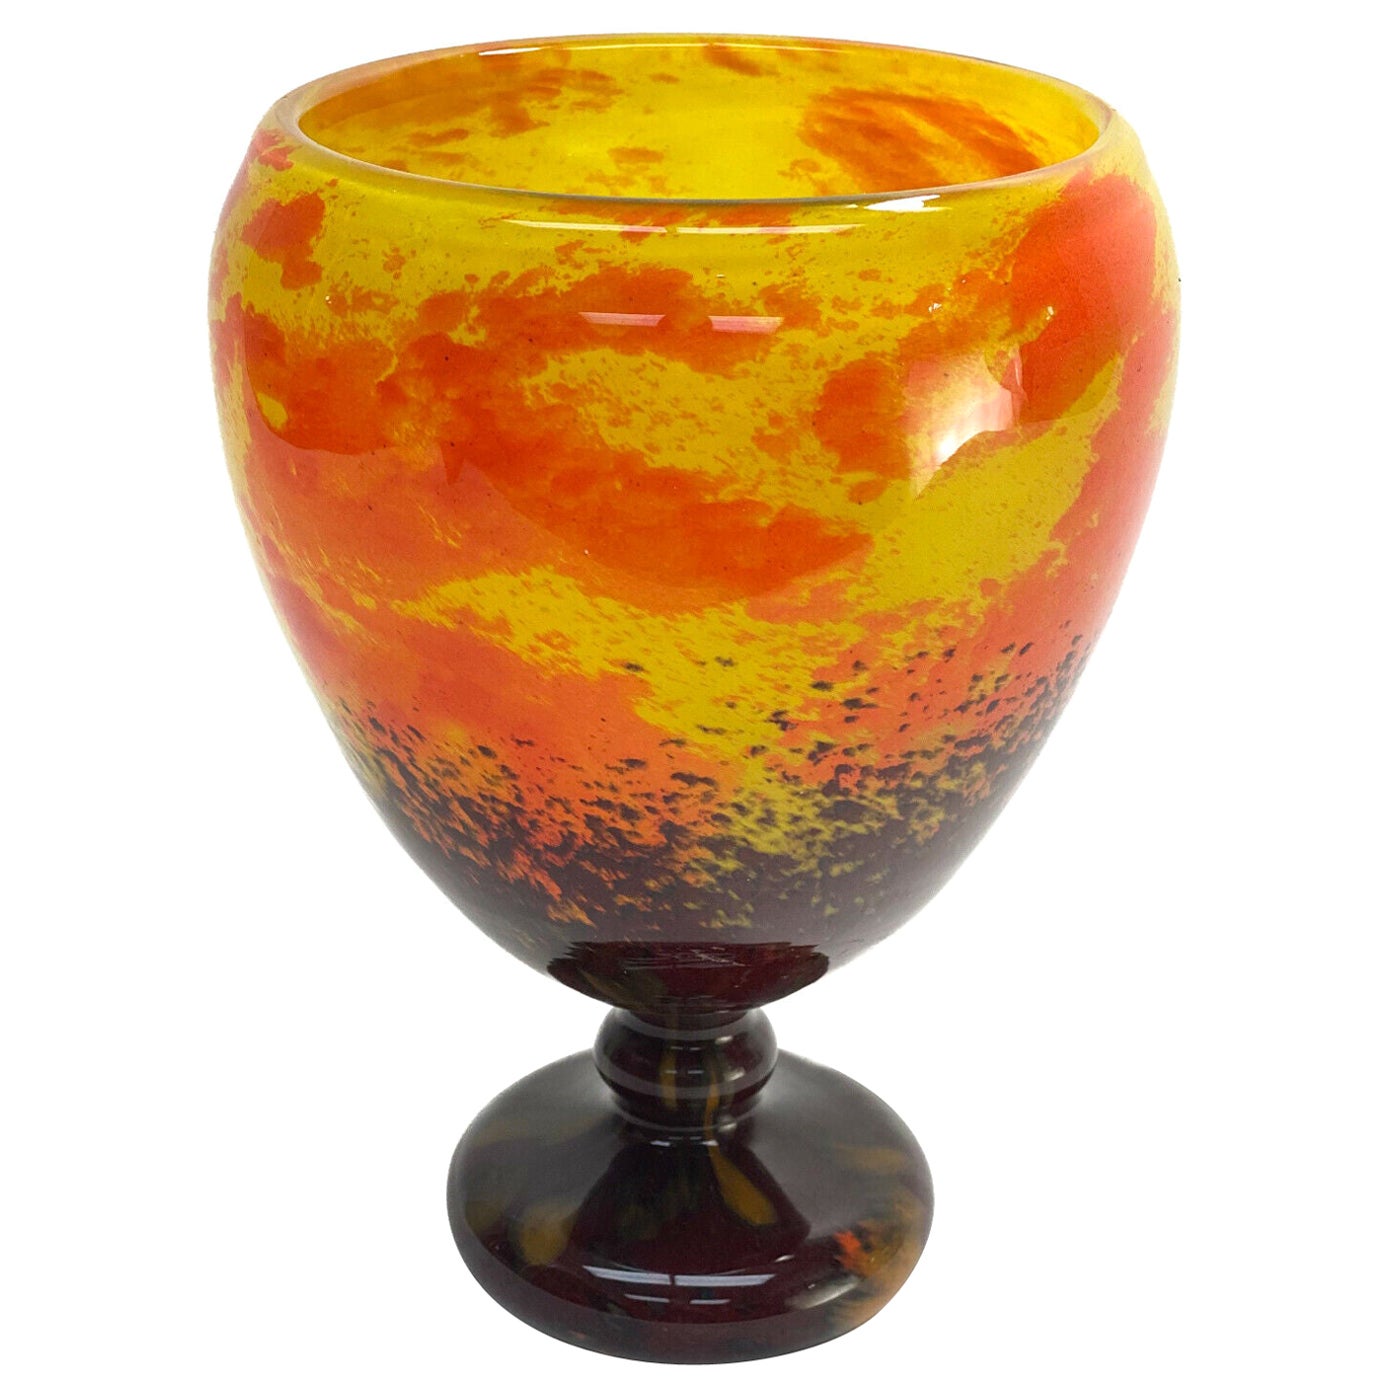 Charles Schneider French Art Glass Orange & Yellow Mottled Footed Vase For Sale